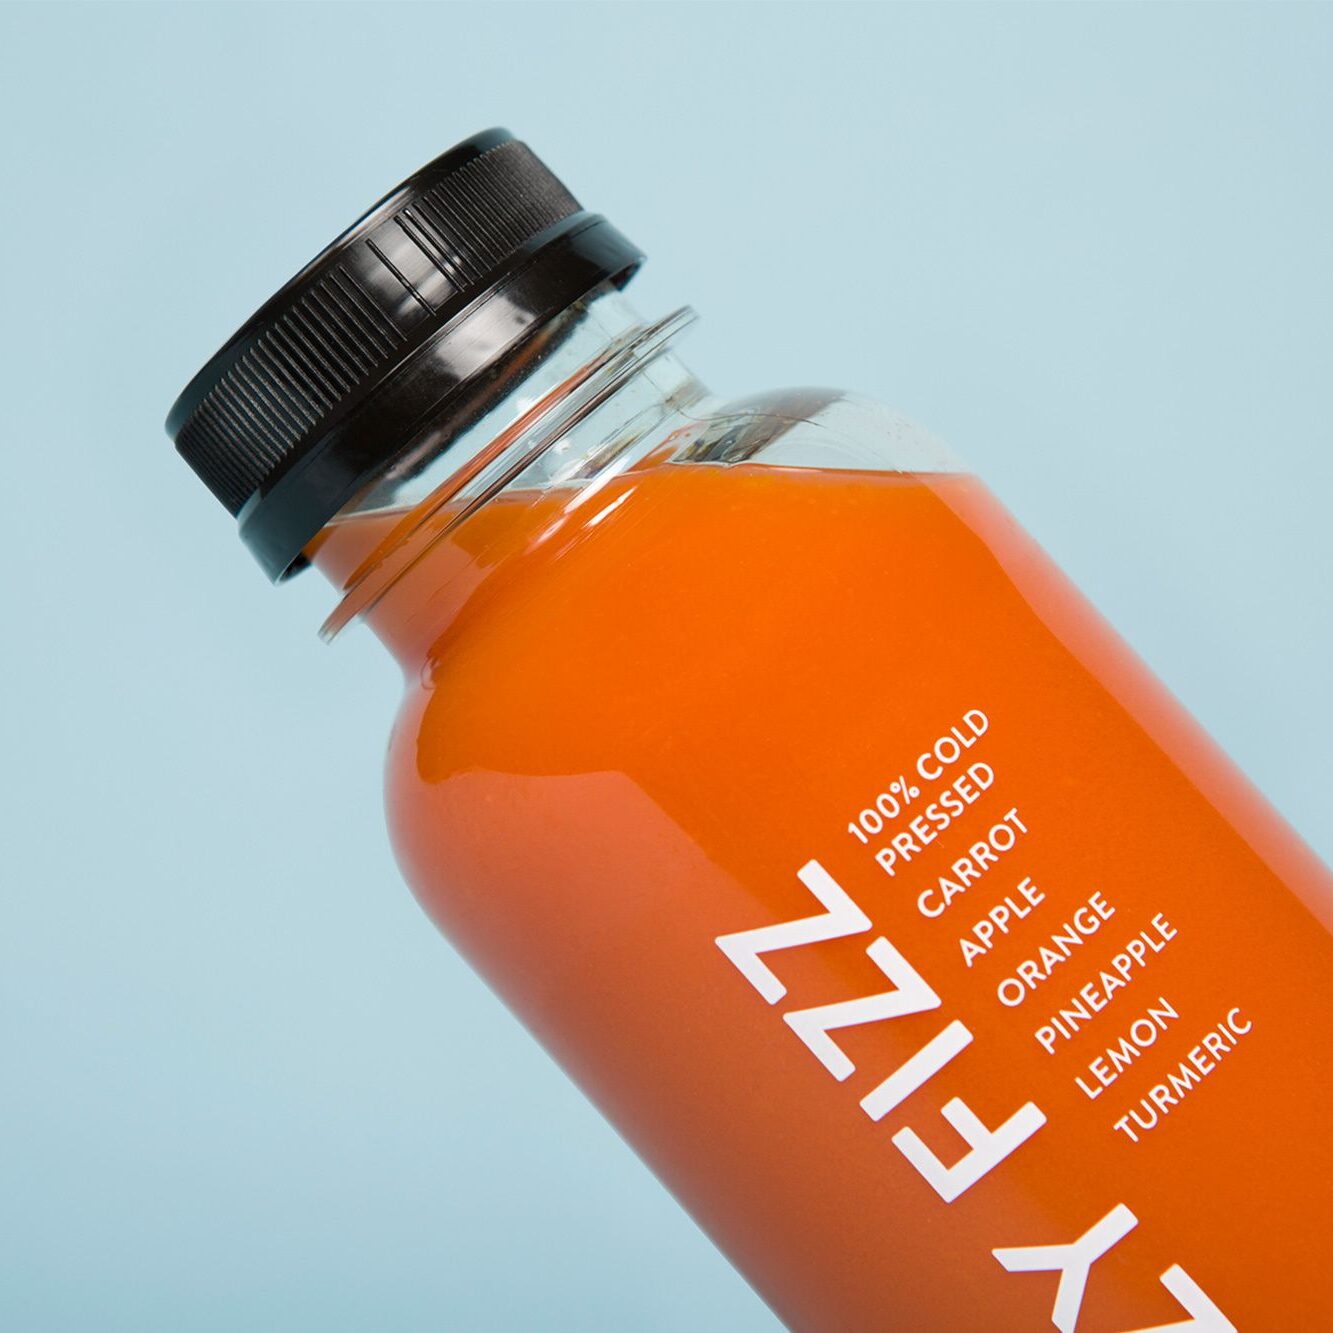 hunterand projects sensory lab pressed juice packaging 2